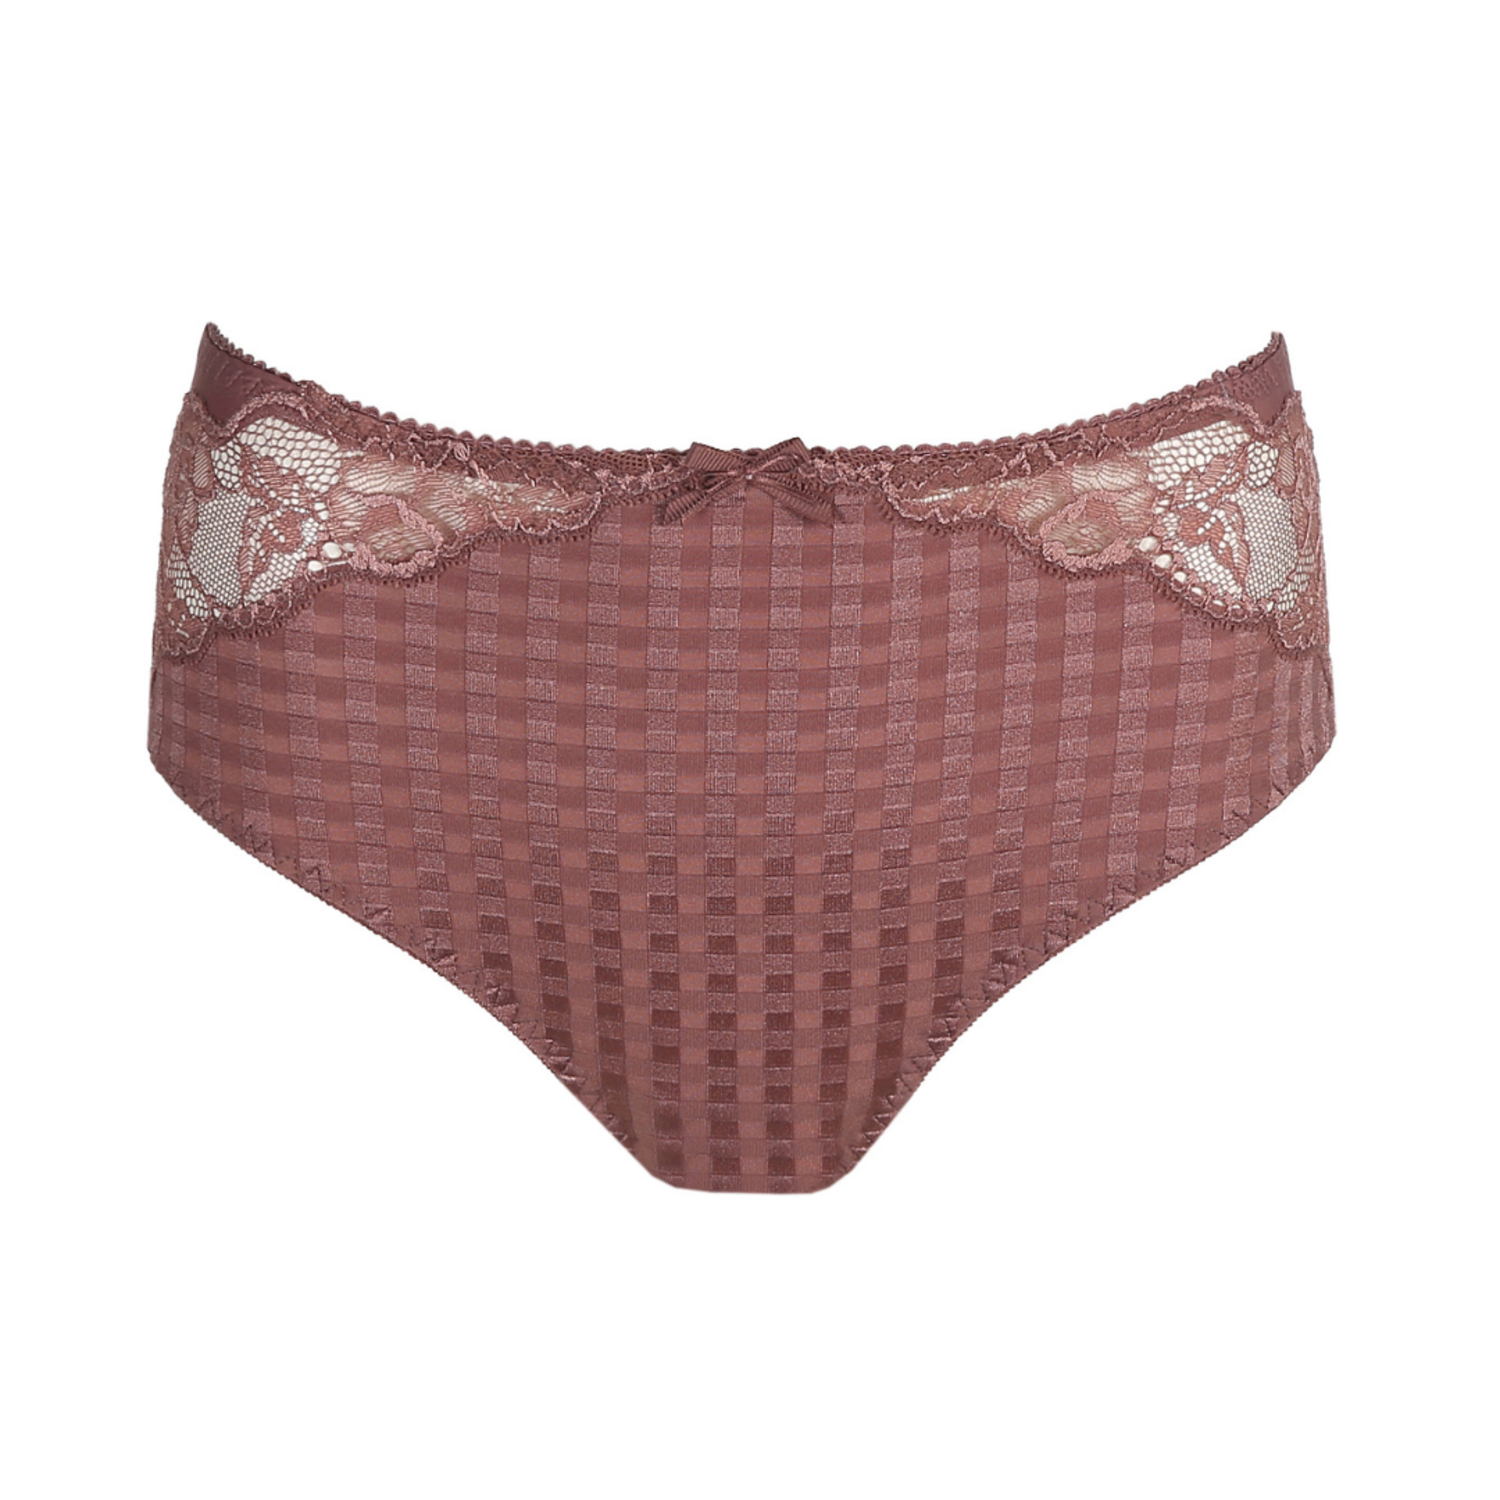 Stacey High Waist Panty 7356. - Madison & Muse